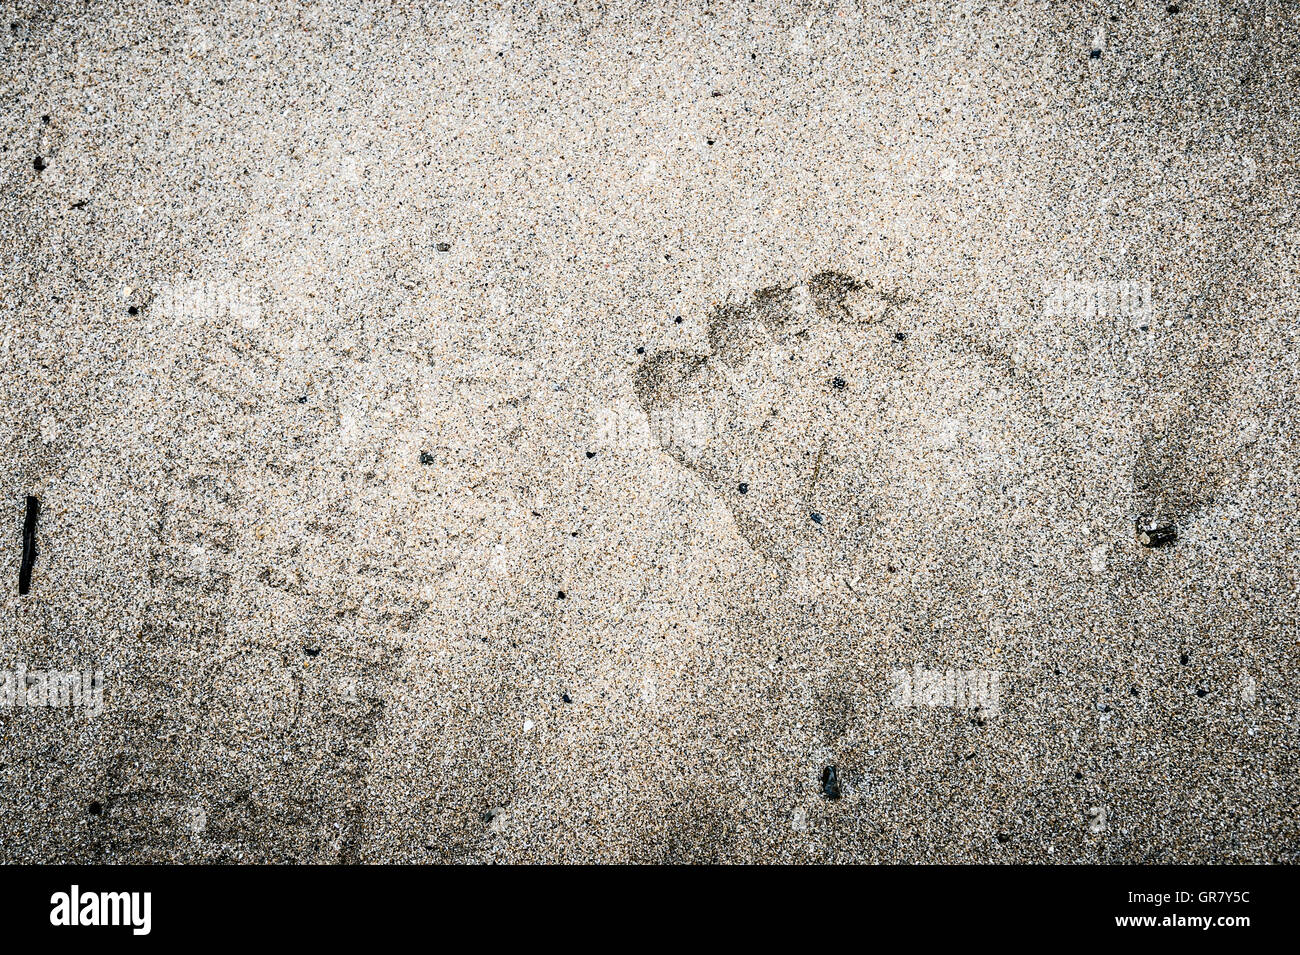 Impression Of Two Feet In The Sand. Stock Photo